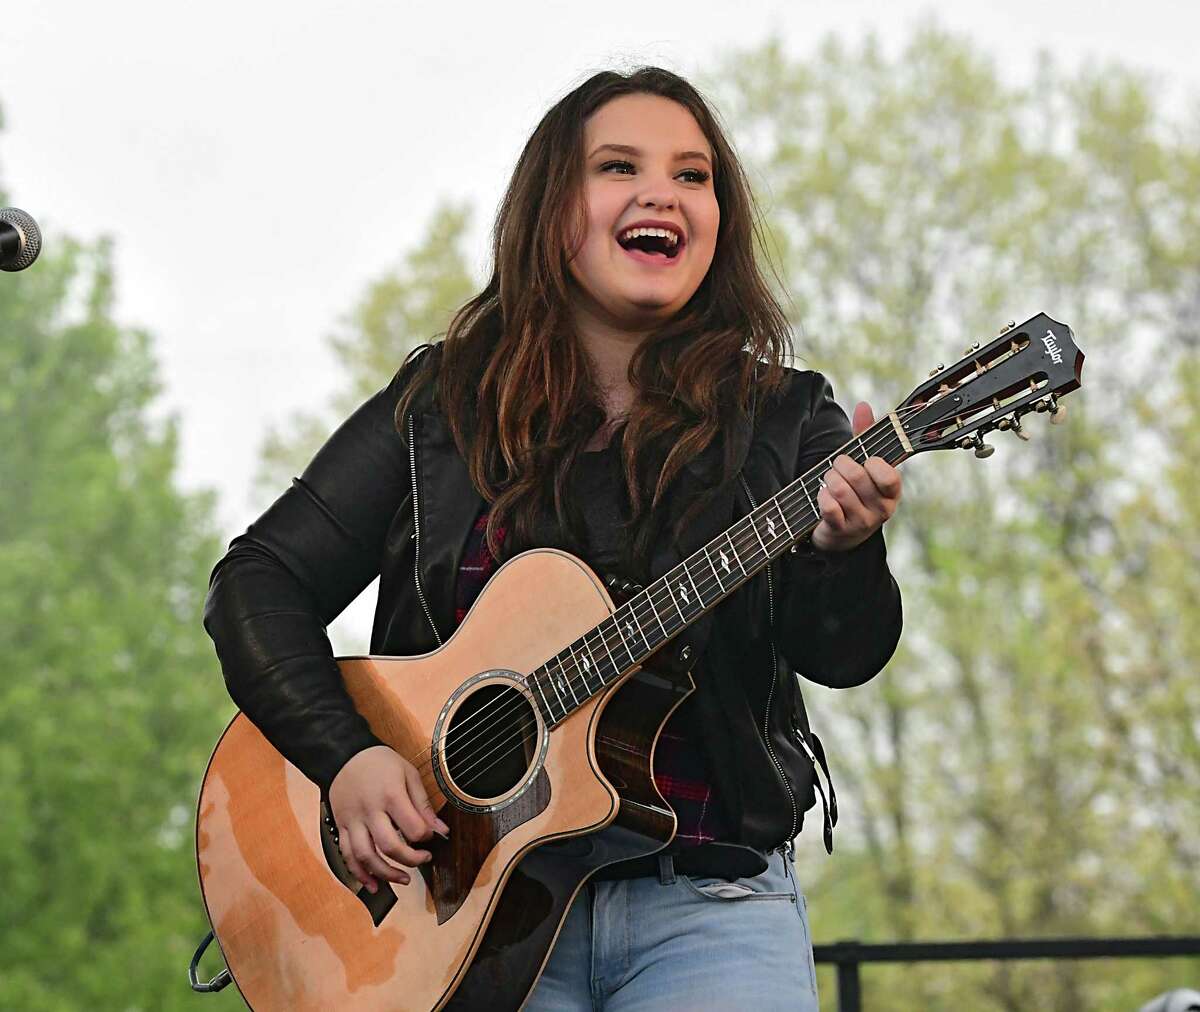 American Idol finalist Madison VanDenburg gives hometown fans in her community a live performance at The Crossings of Colonie on Tuesday, May 14, 2019 in Colonie, N.Y. The show had a production crew filming the event for the next show. (Lori Van Buren/Times Union)